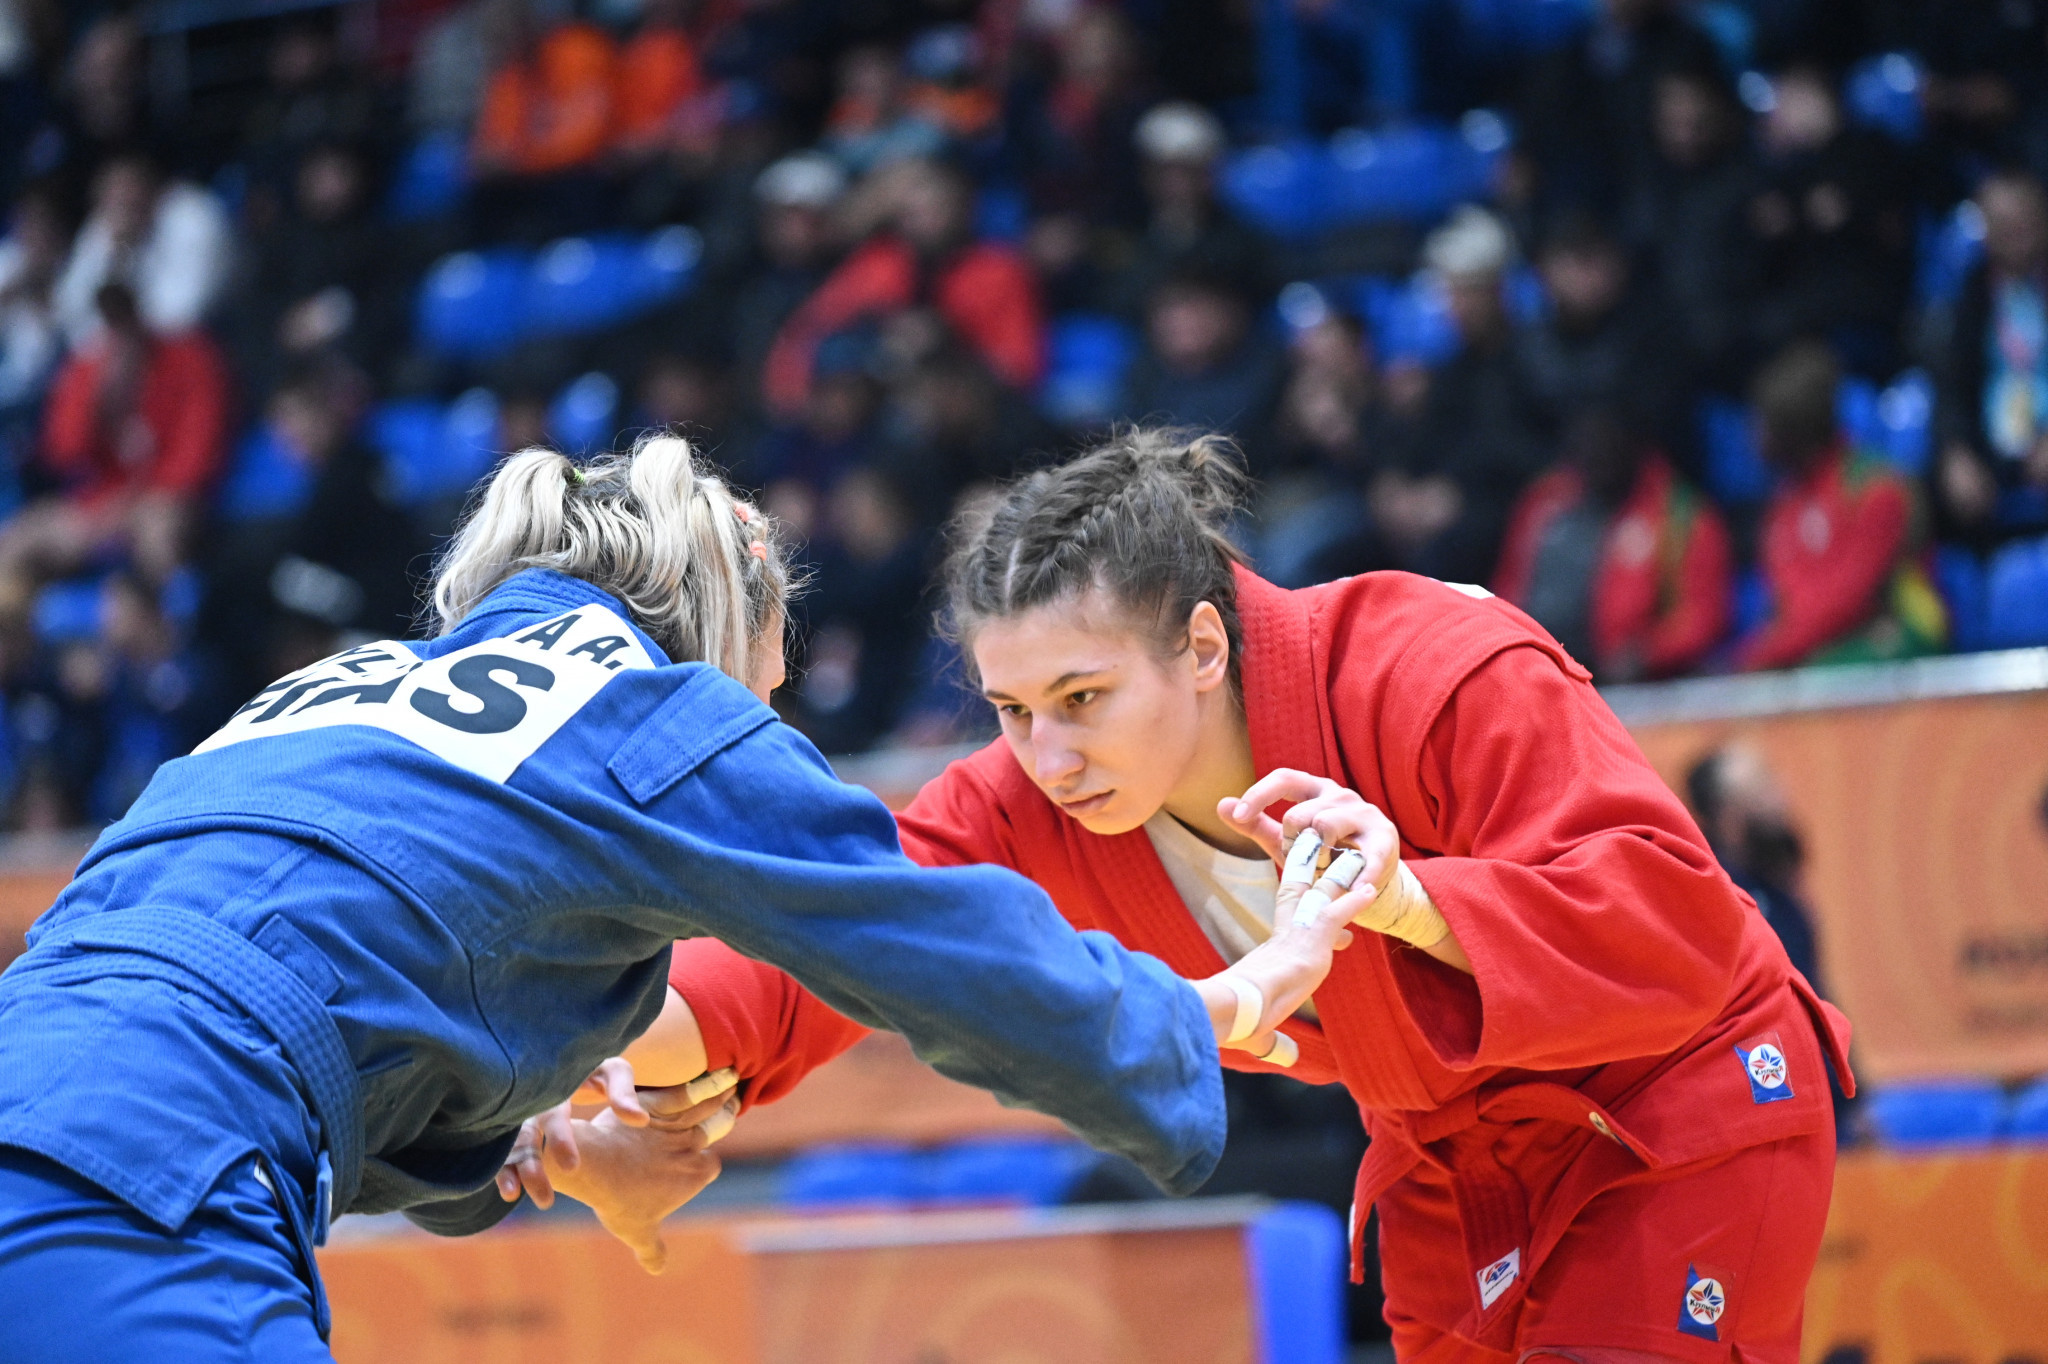 "Neutral" athletes strike gold five times on second day of World Sambo Championships